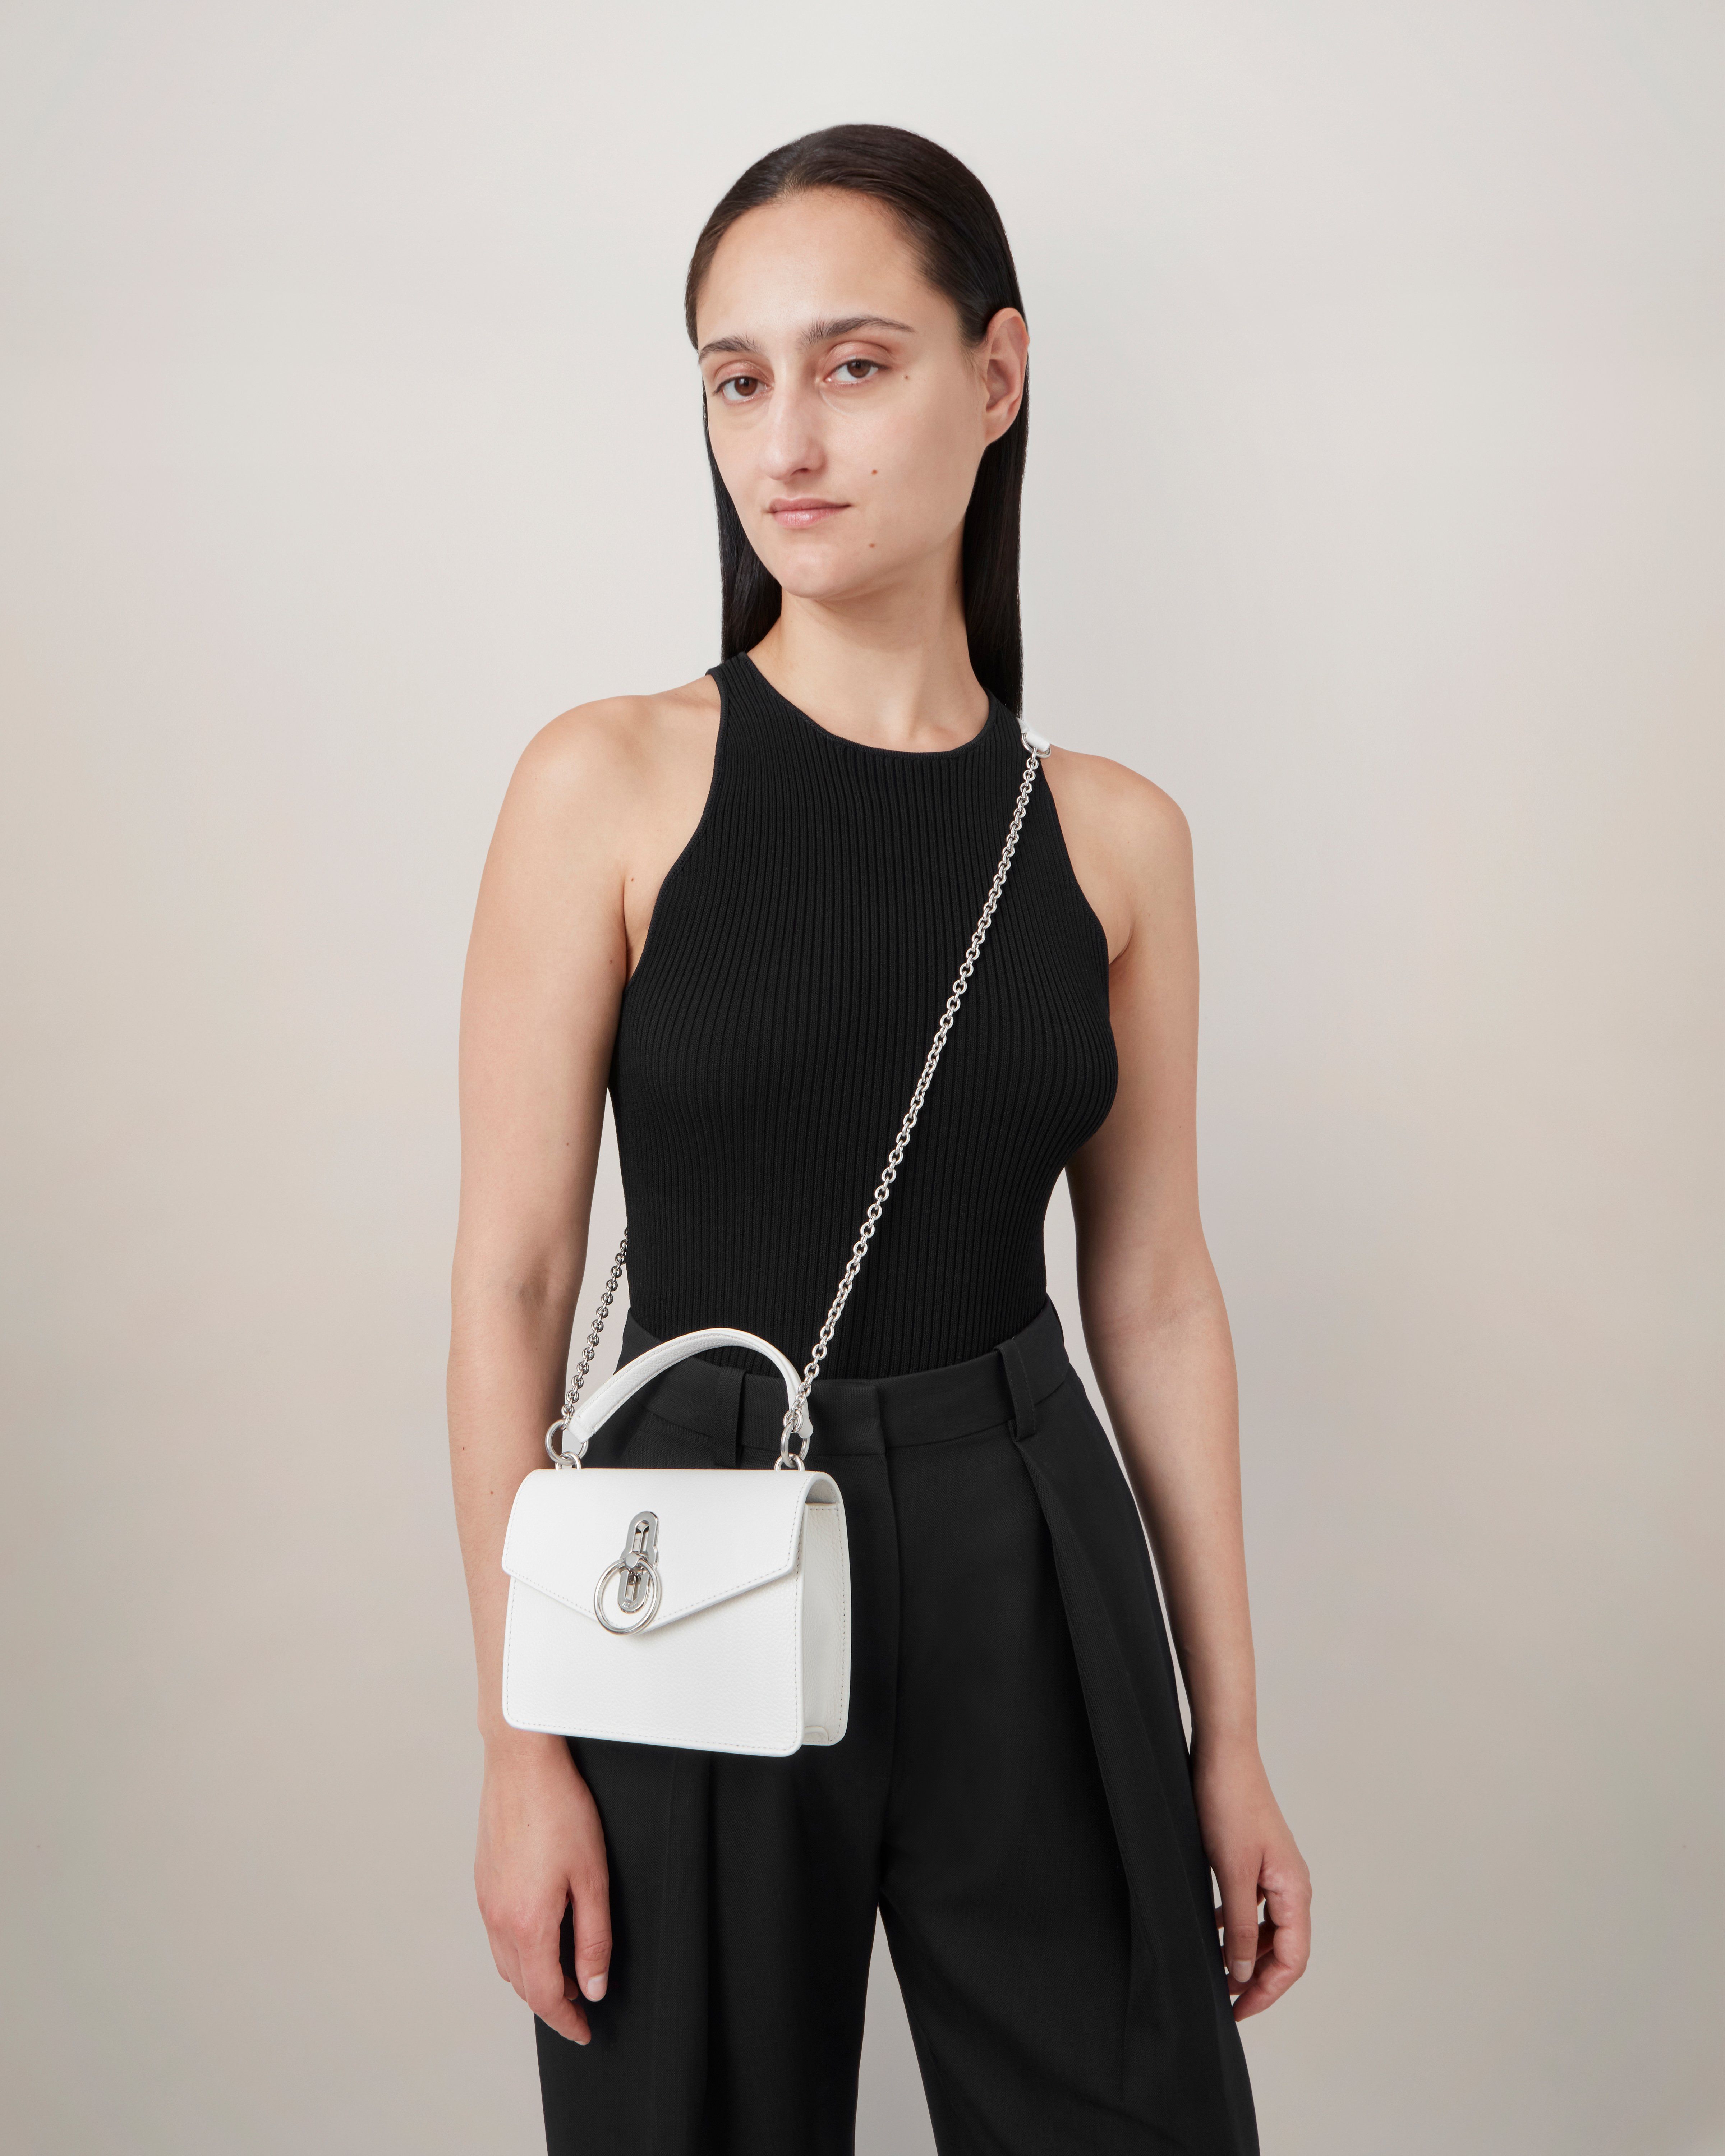 Model wearing the Small Amberley Crossbody in White Small Classic Grain